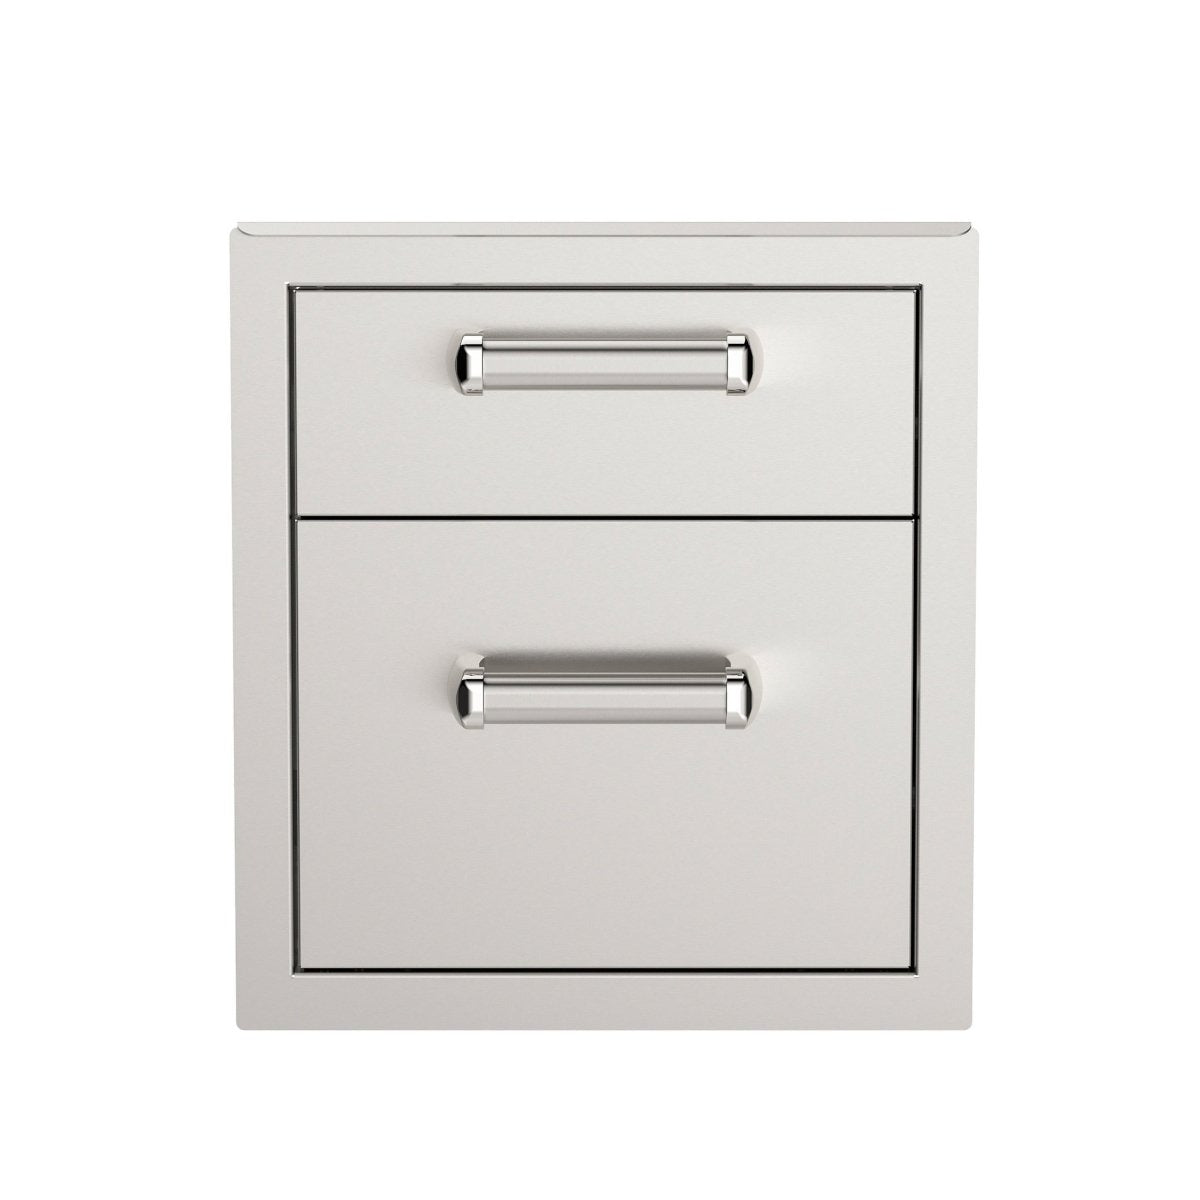 Fire Magic Grills Double Drawer - Outdoorium